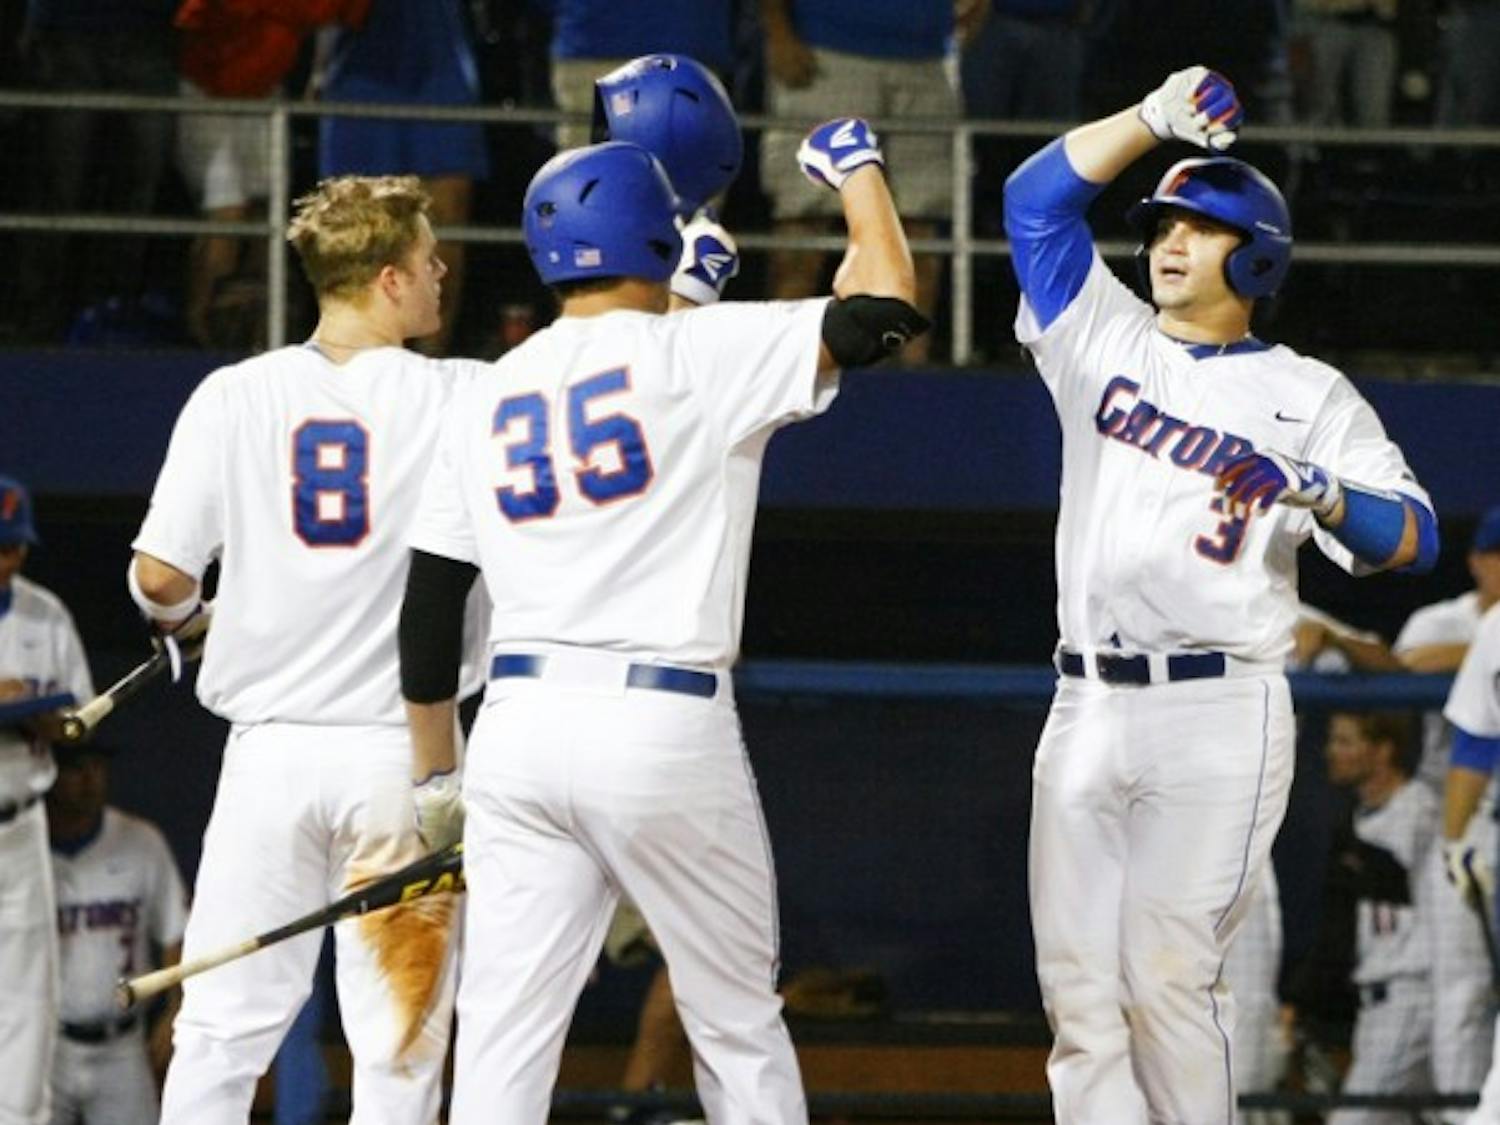 Mike Zunino hit two home runs in consecutive plate appearances to give Florida a 4-2 win against Florida Gulf Coast on Friday night.